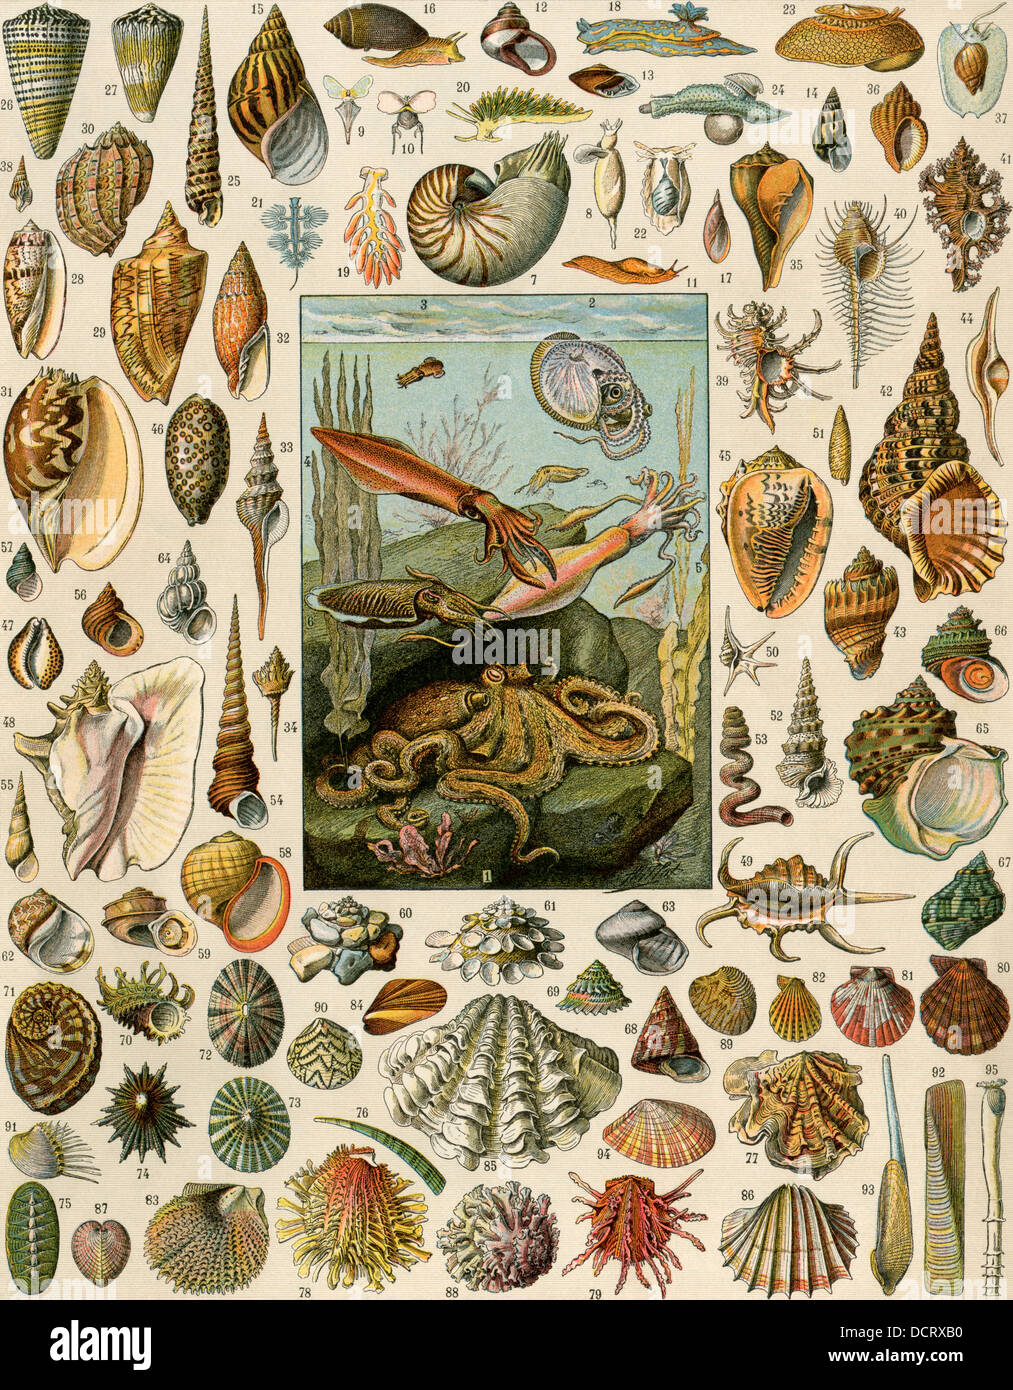 Varieties of molluscs, including scallop, clam, conch, snail, and squid. Color lithograph Stock Photo